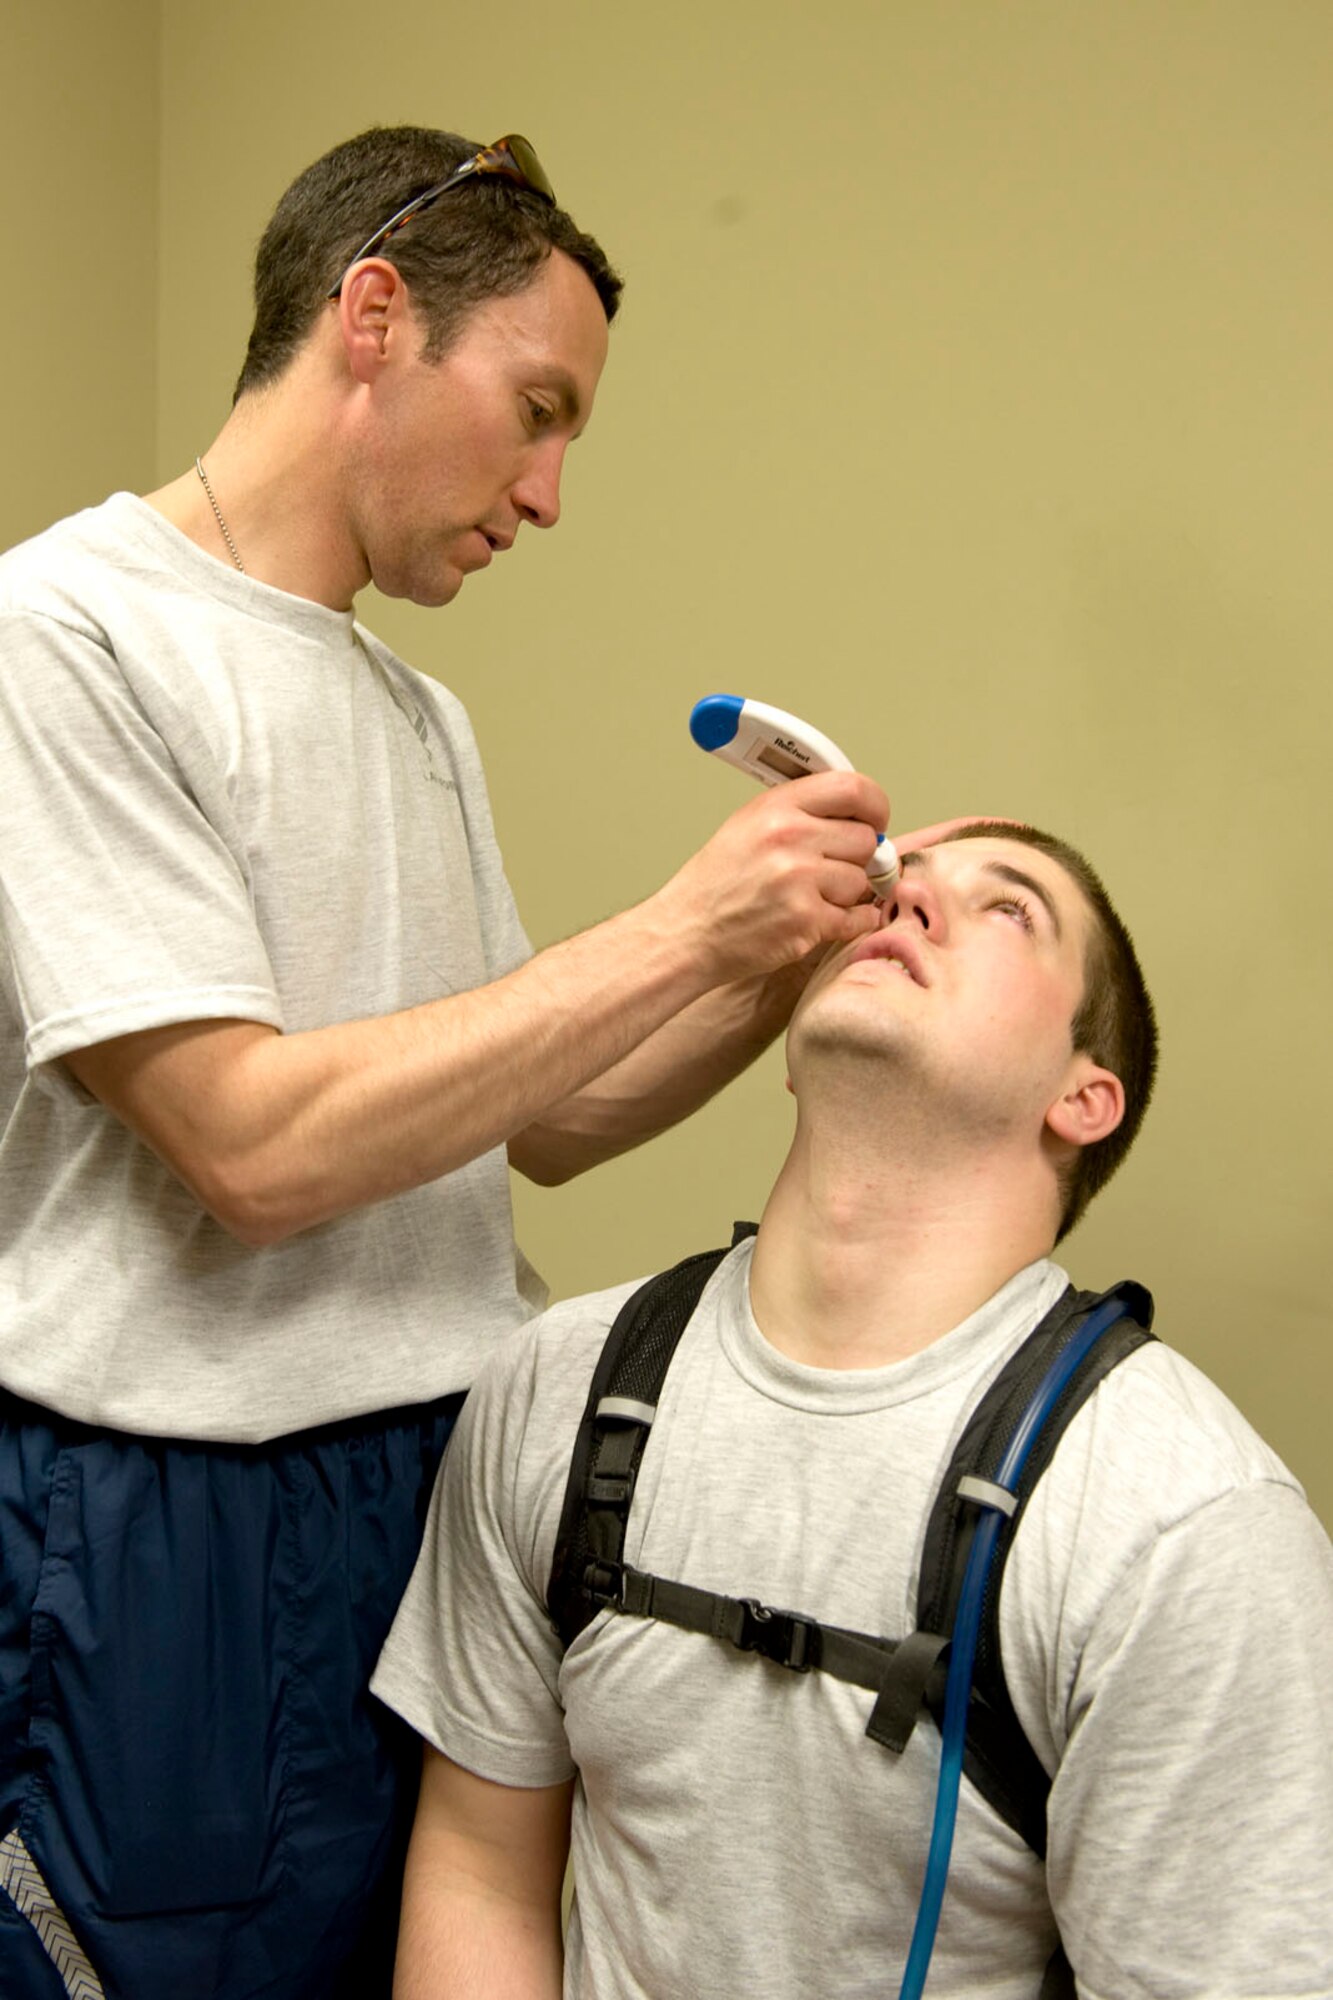 HAYNEVILLE, Ala. - Capt. Andrew Adamich, an optometrist from the 176th Medical Group, Alaska Air National Guard, performs an equipment test on Airman Aaron Brehm, an optometry technician, also with the medicial group, May 1, 2011.  Adamich is doing a inner ocular pressure test which helps in screening for glaucoma and for the early signs of the disease. Adamich and Brehm and about 30 other members from the 176th Wing are in Alabama for an Innovative Readiness Training (IRT) mission. The IRT program allows for real world training opportunities for military personnel while providing needed services to under-served communities in the United States. The Shower kits will be used by the men of the group during the 10-day mission.  Alaska Air National Guard photo by Master Sgt. Shannon Oleson.